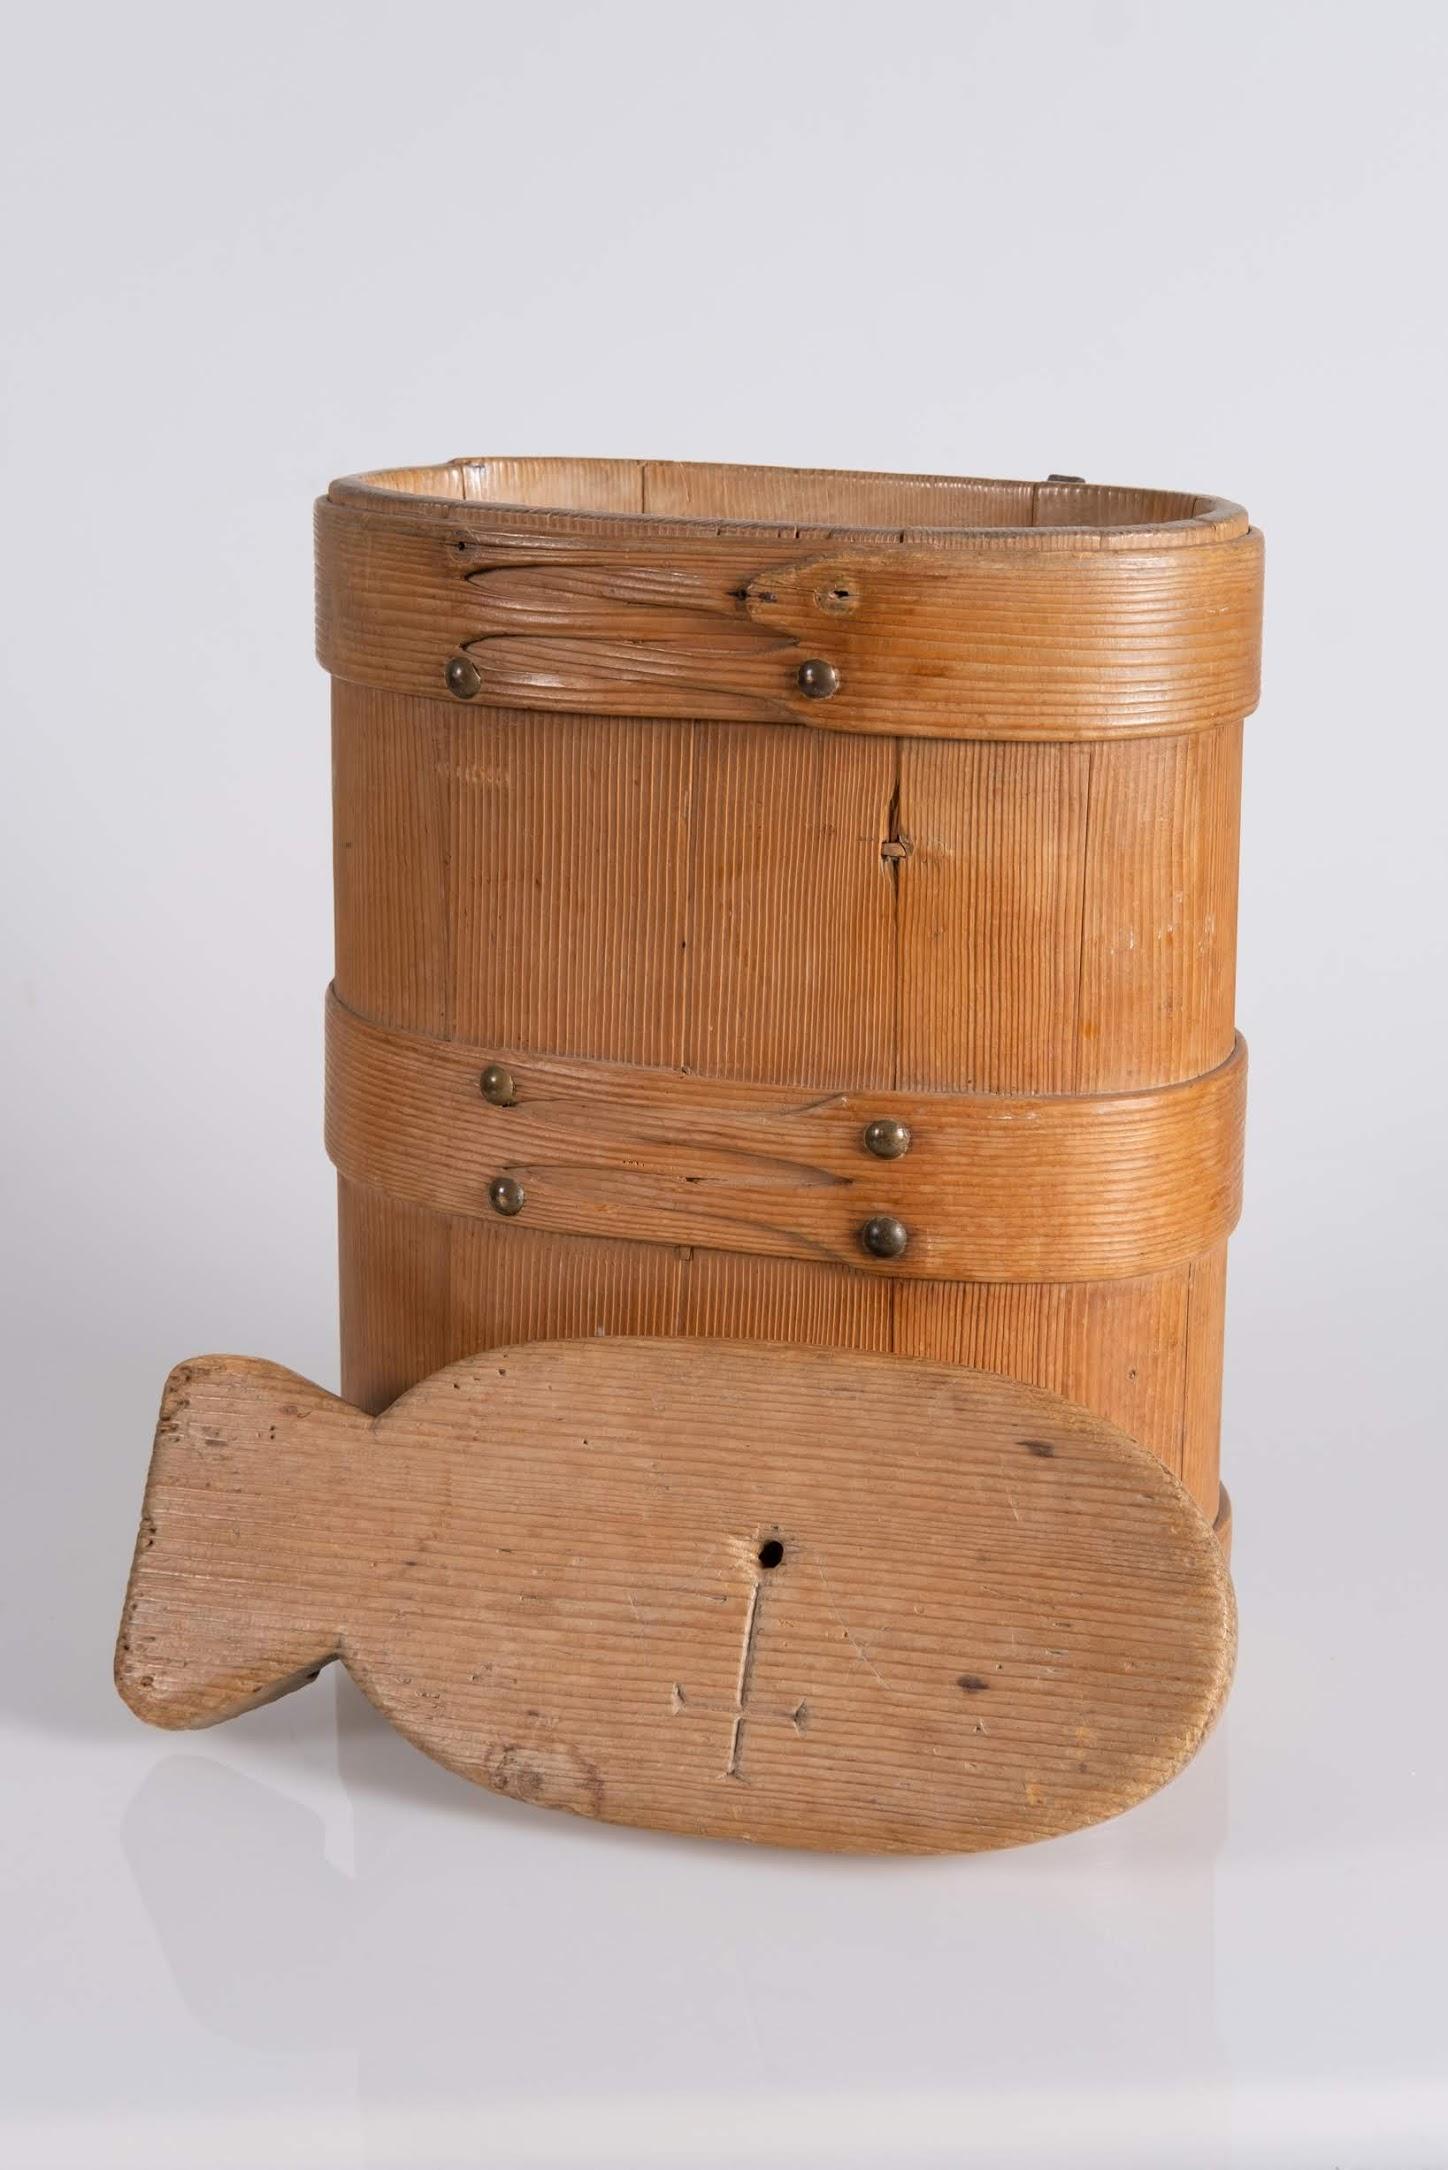 This container was one fitted with a leather or fabric strap to be carried on the shoulders. It was used to carry milk.